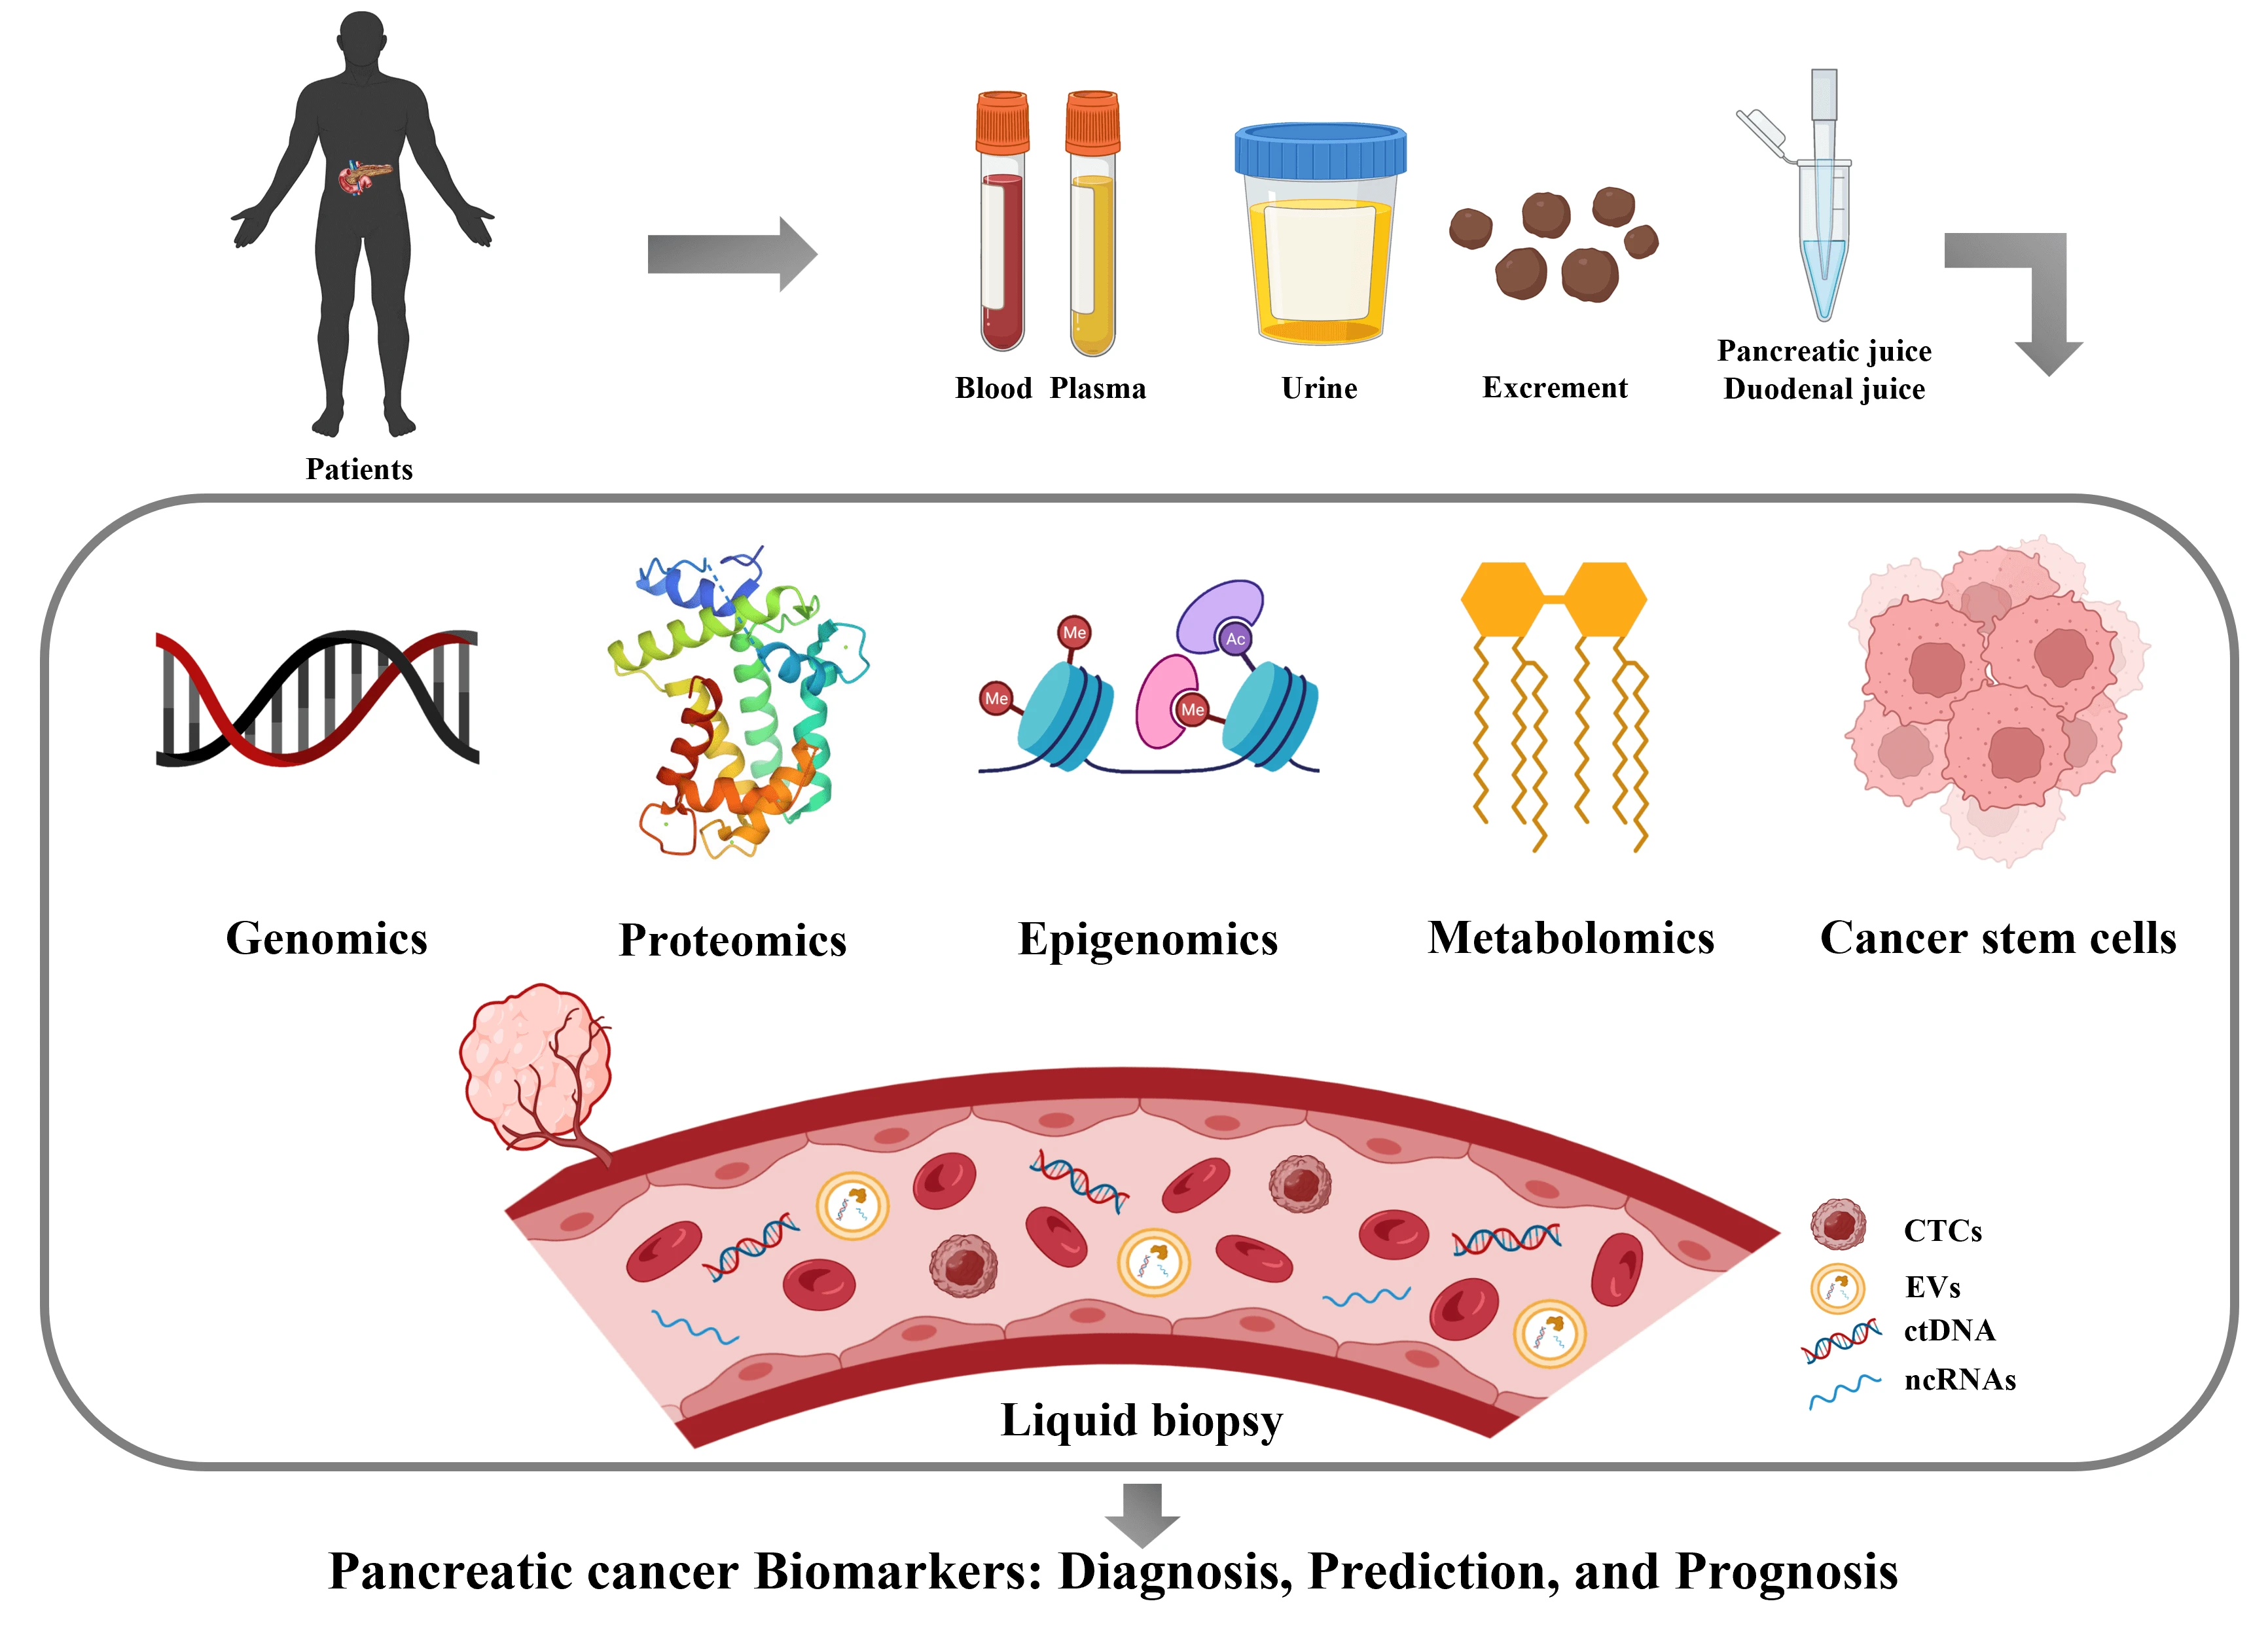 Progress on diagnostic and prognostic markers of pancreatic cancer